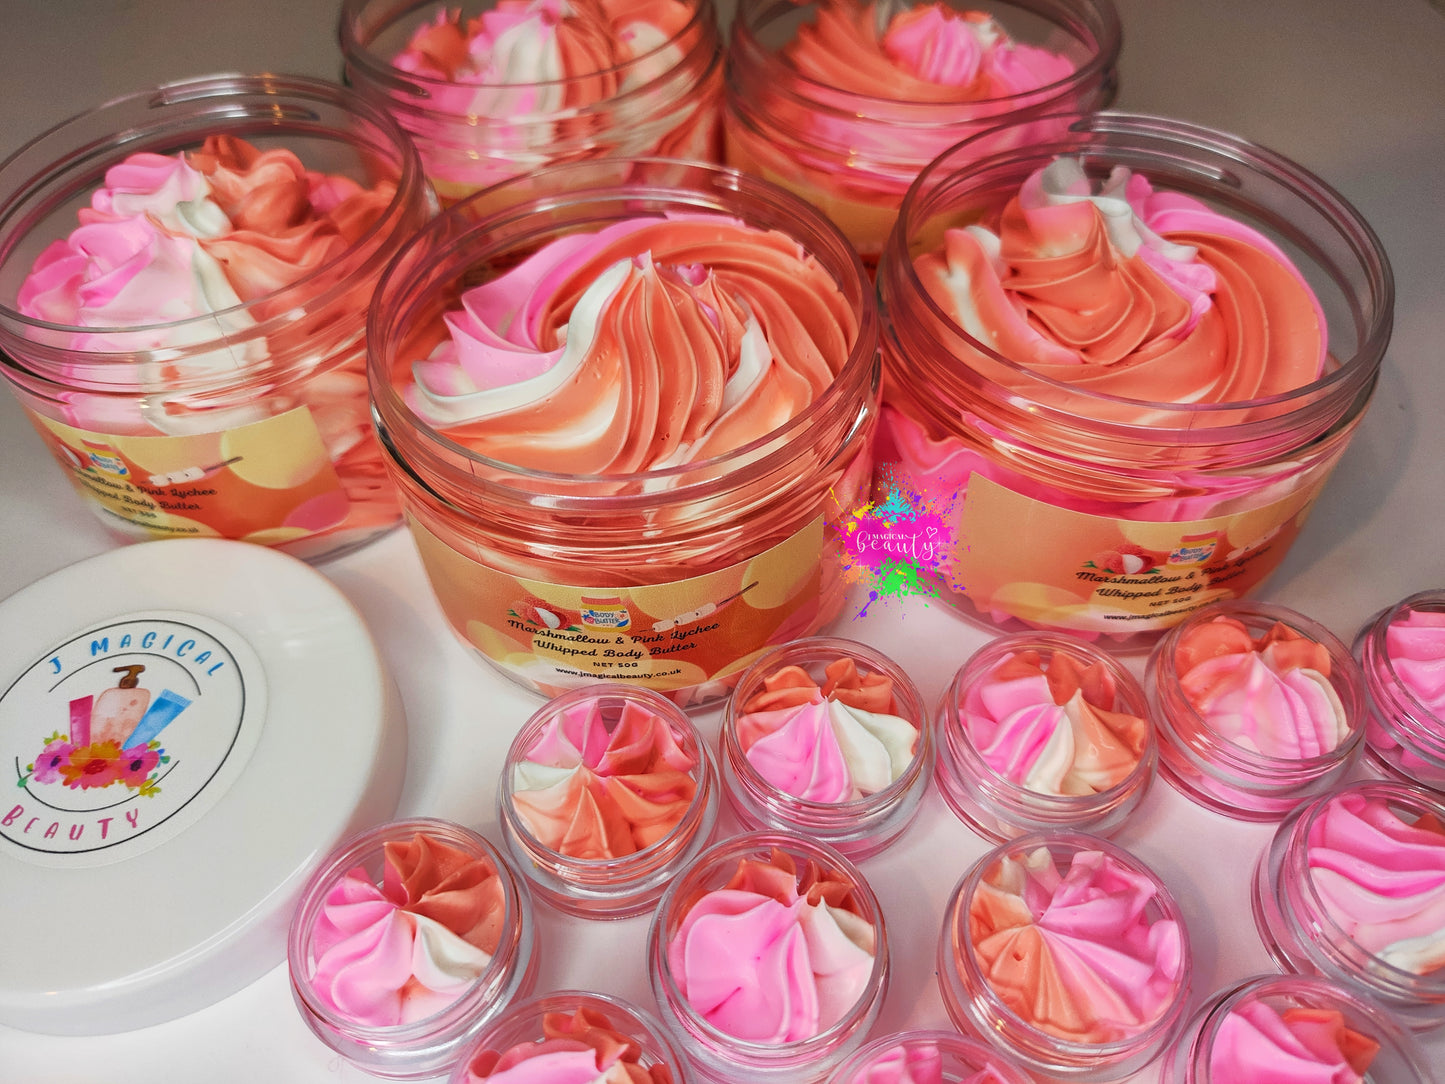 Marshmallow & Pink Lychee scent Whipped Body Butter